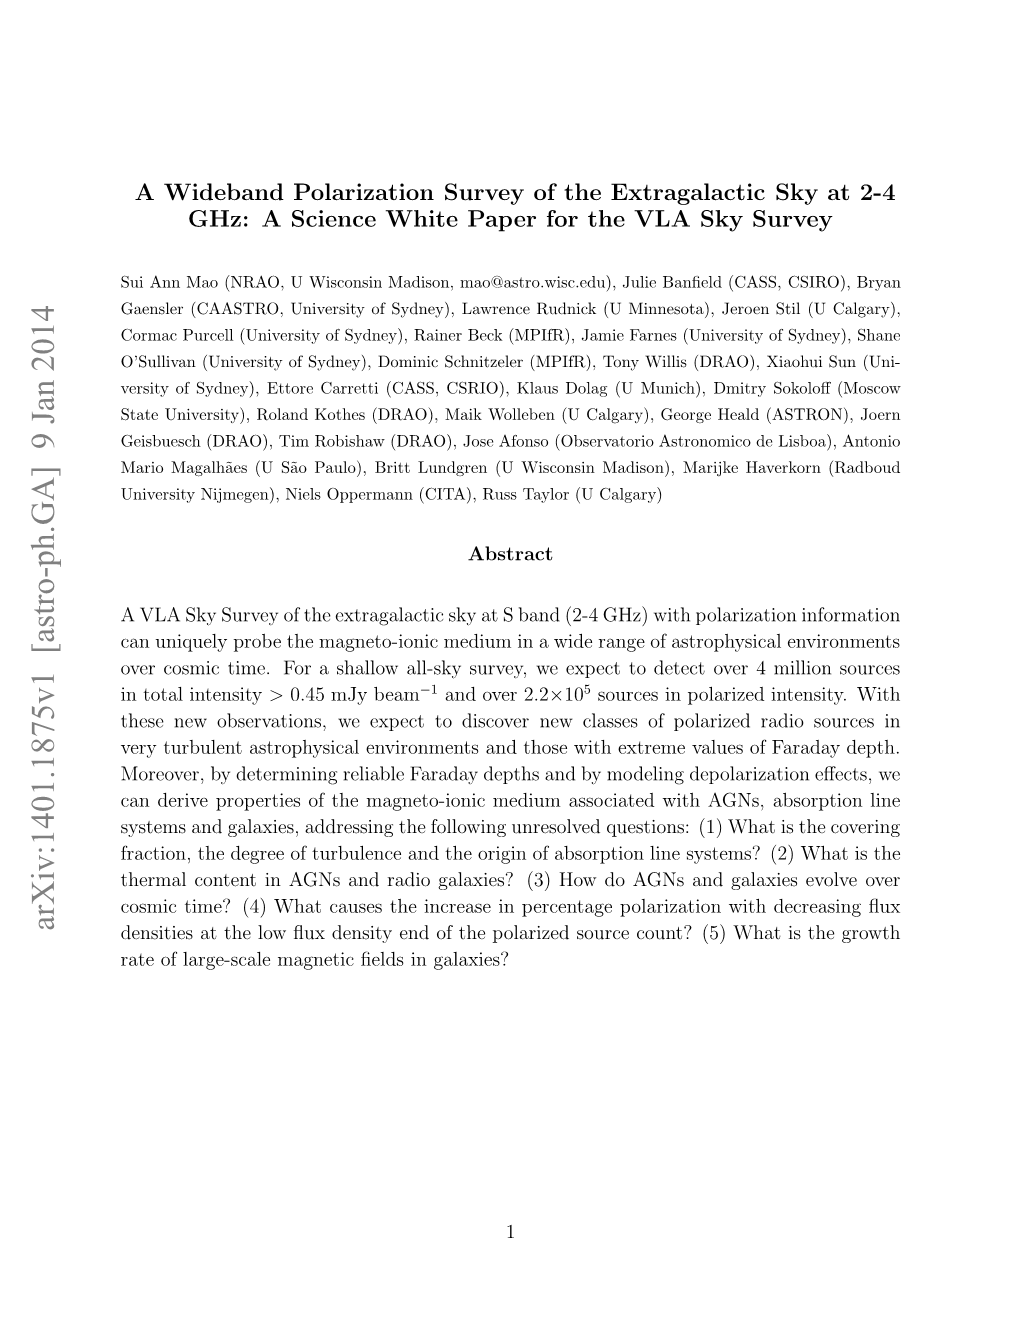 A Wideband Polarization Survey of the Extragalactic Sky at 2-4 Ghz: A